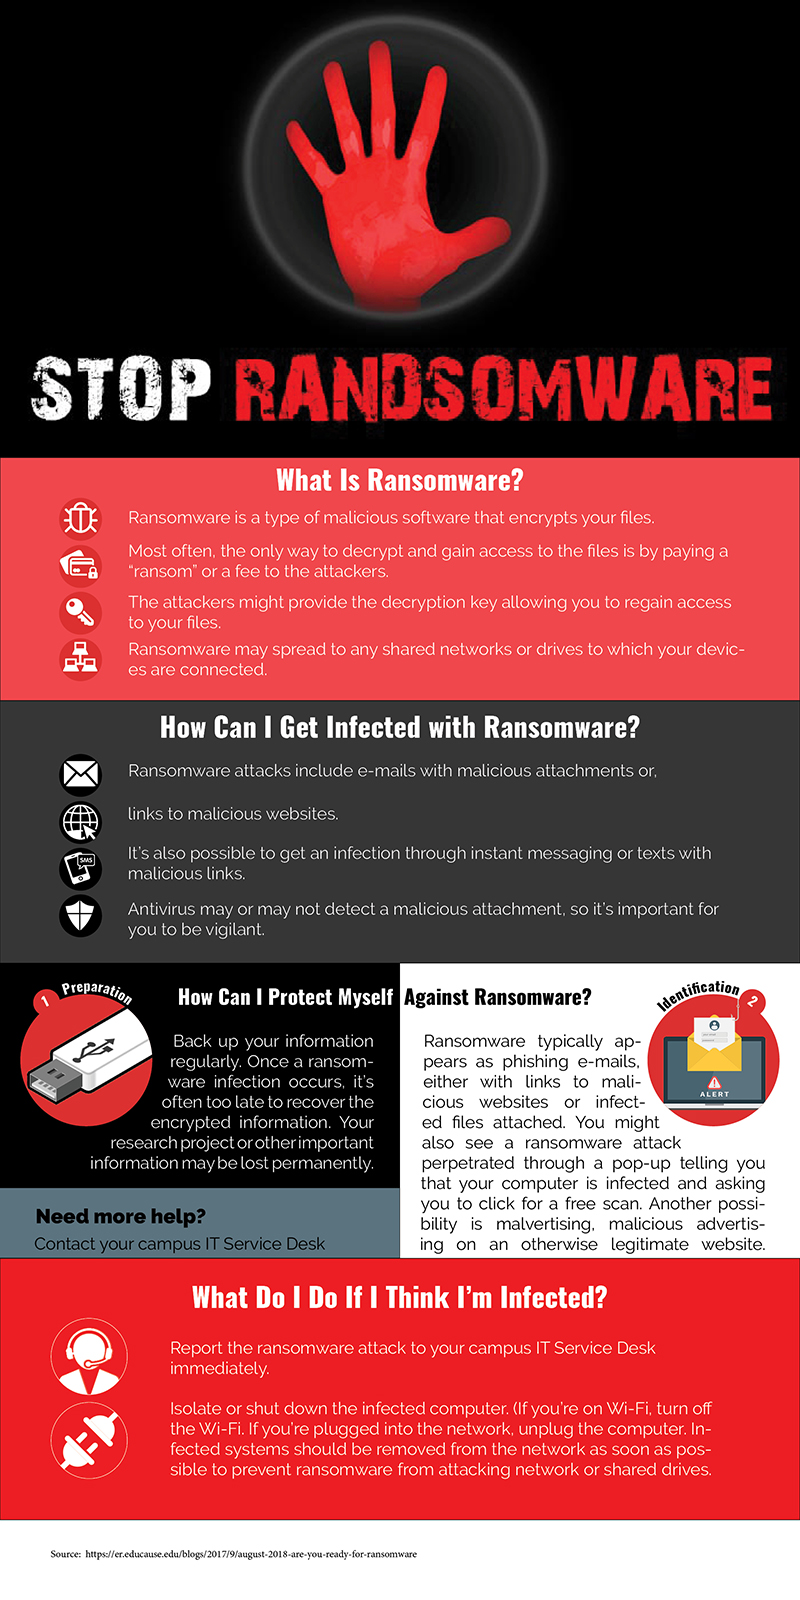 Hand posing a stop to indicate Stop Ransomware